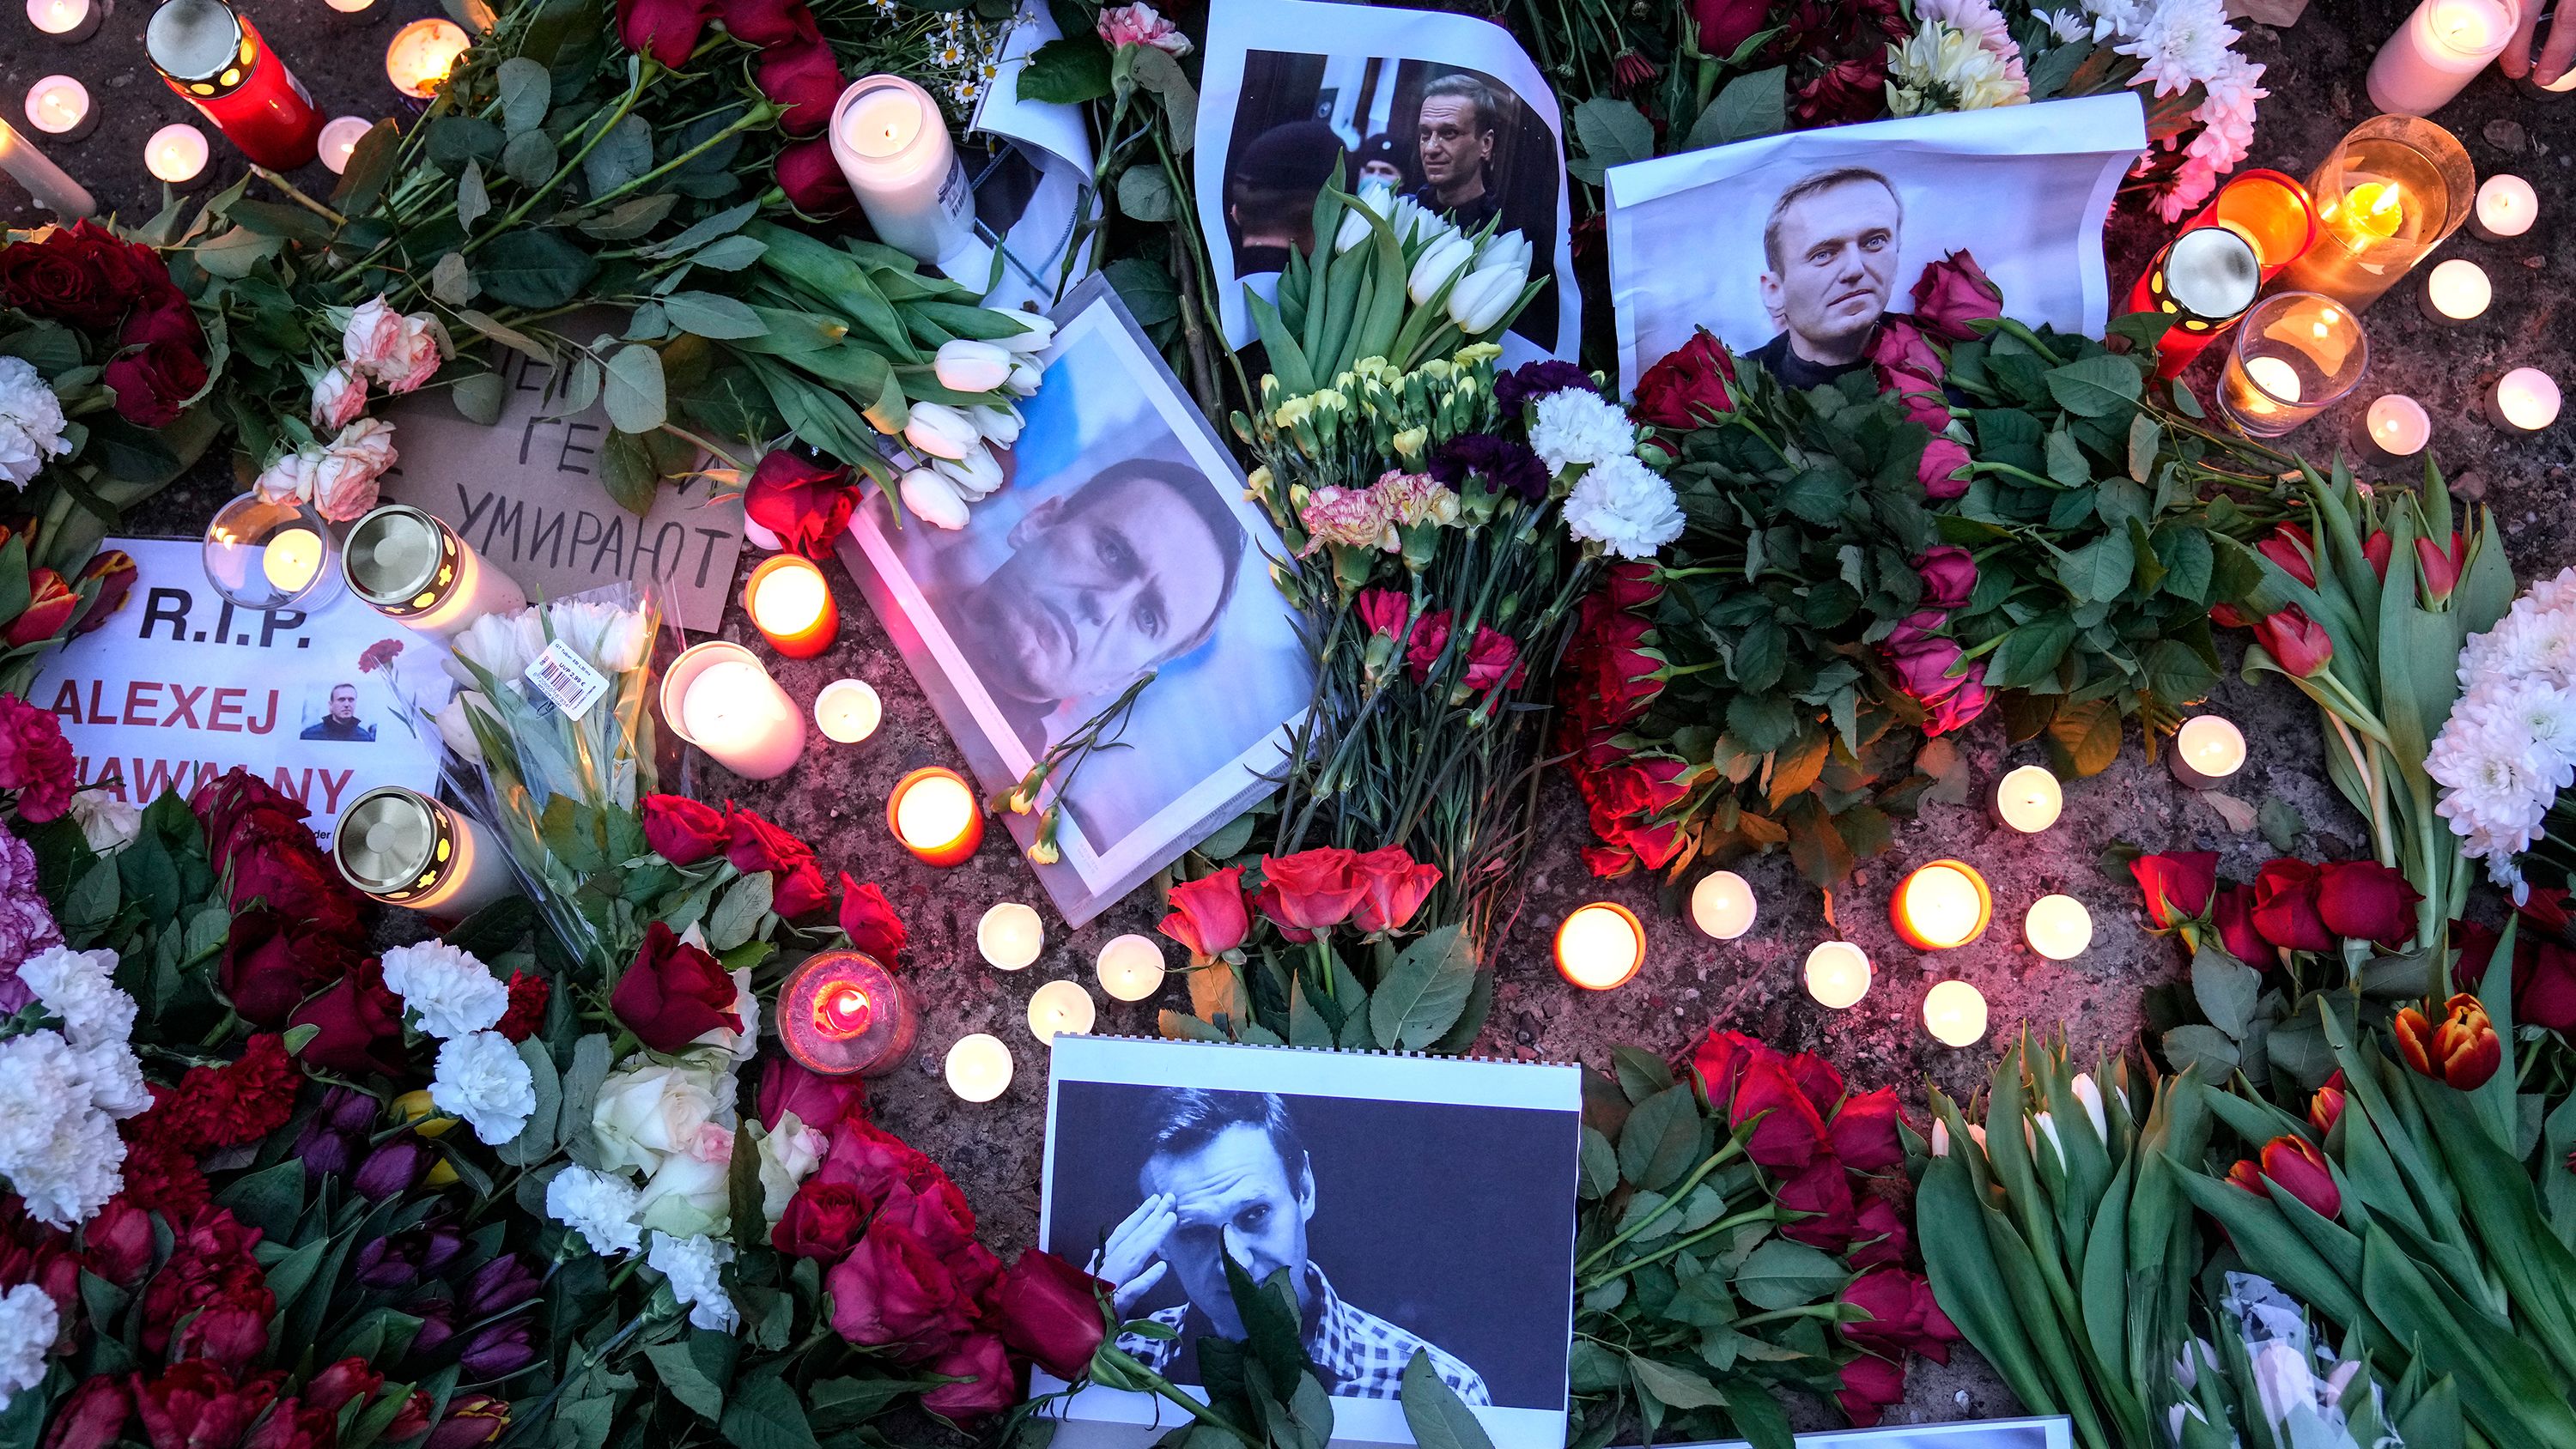 Portraits of jailed Russian opposition leader Alexey Navalny, flowers and candles are laid on a ground as people protest in front of the Russian embassy in Berlin on Friday.